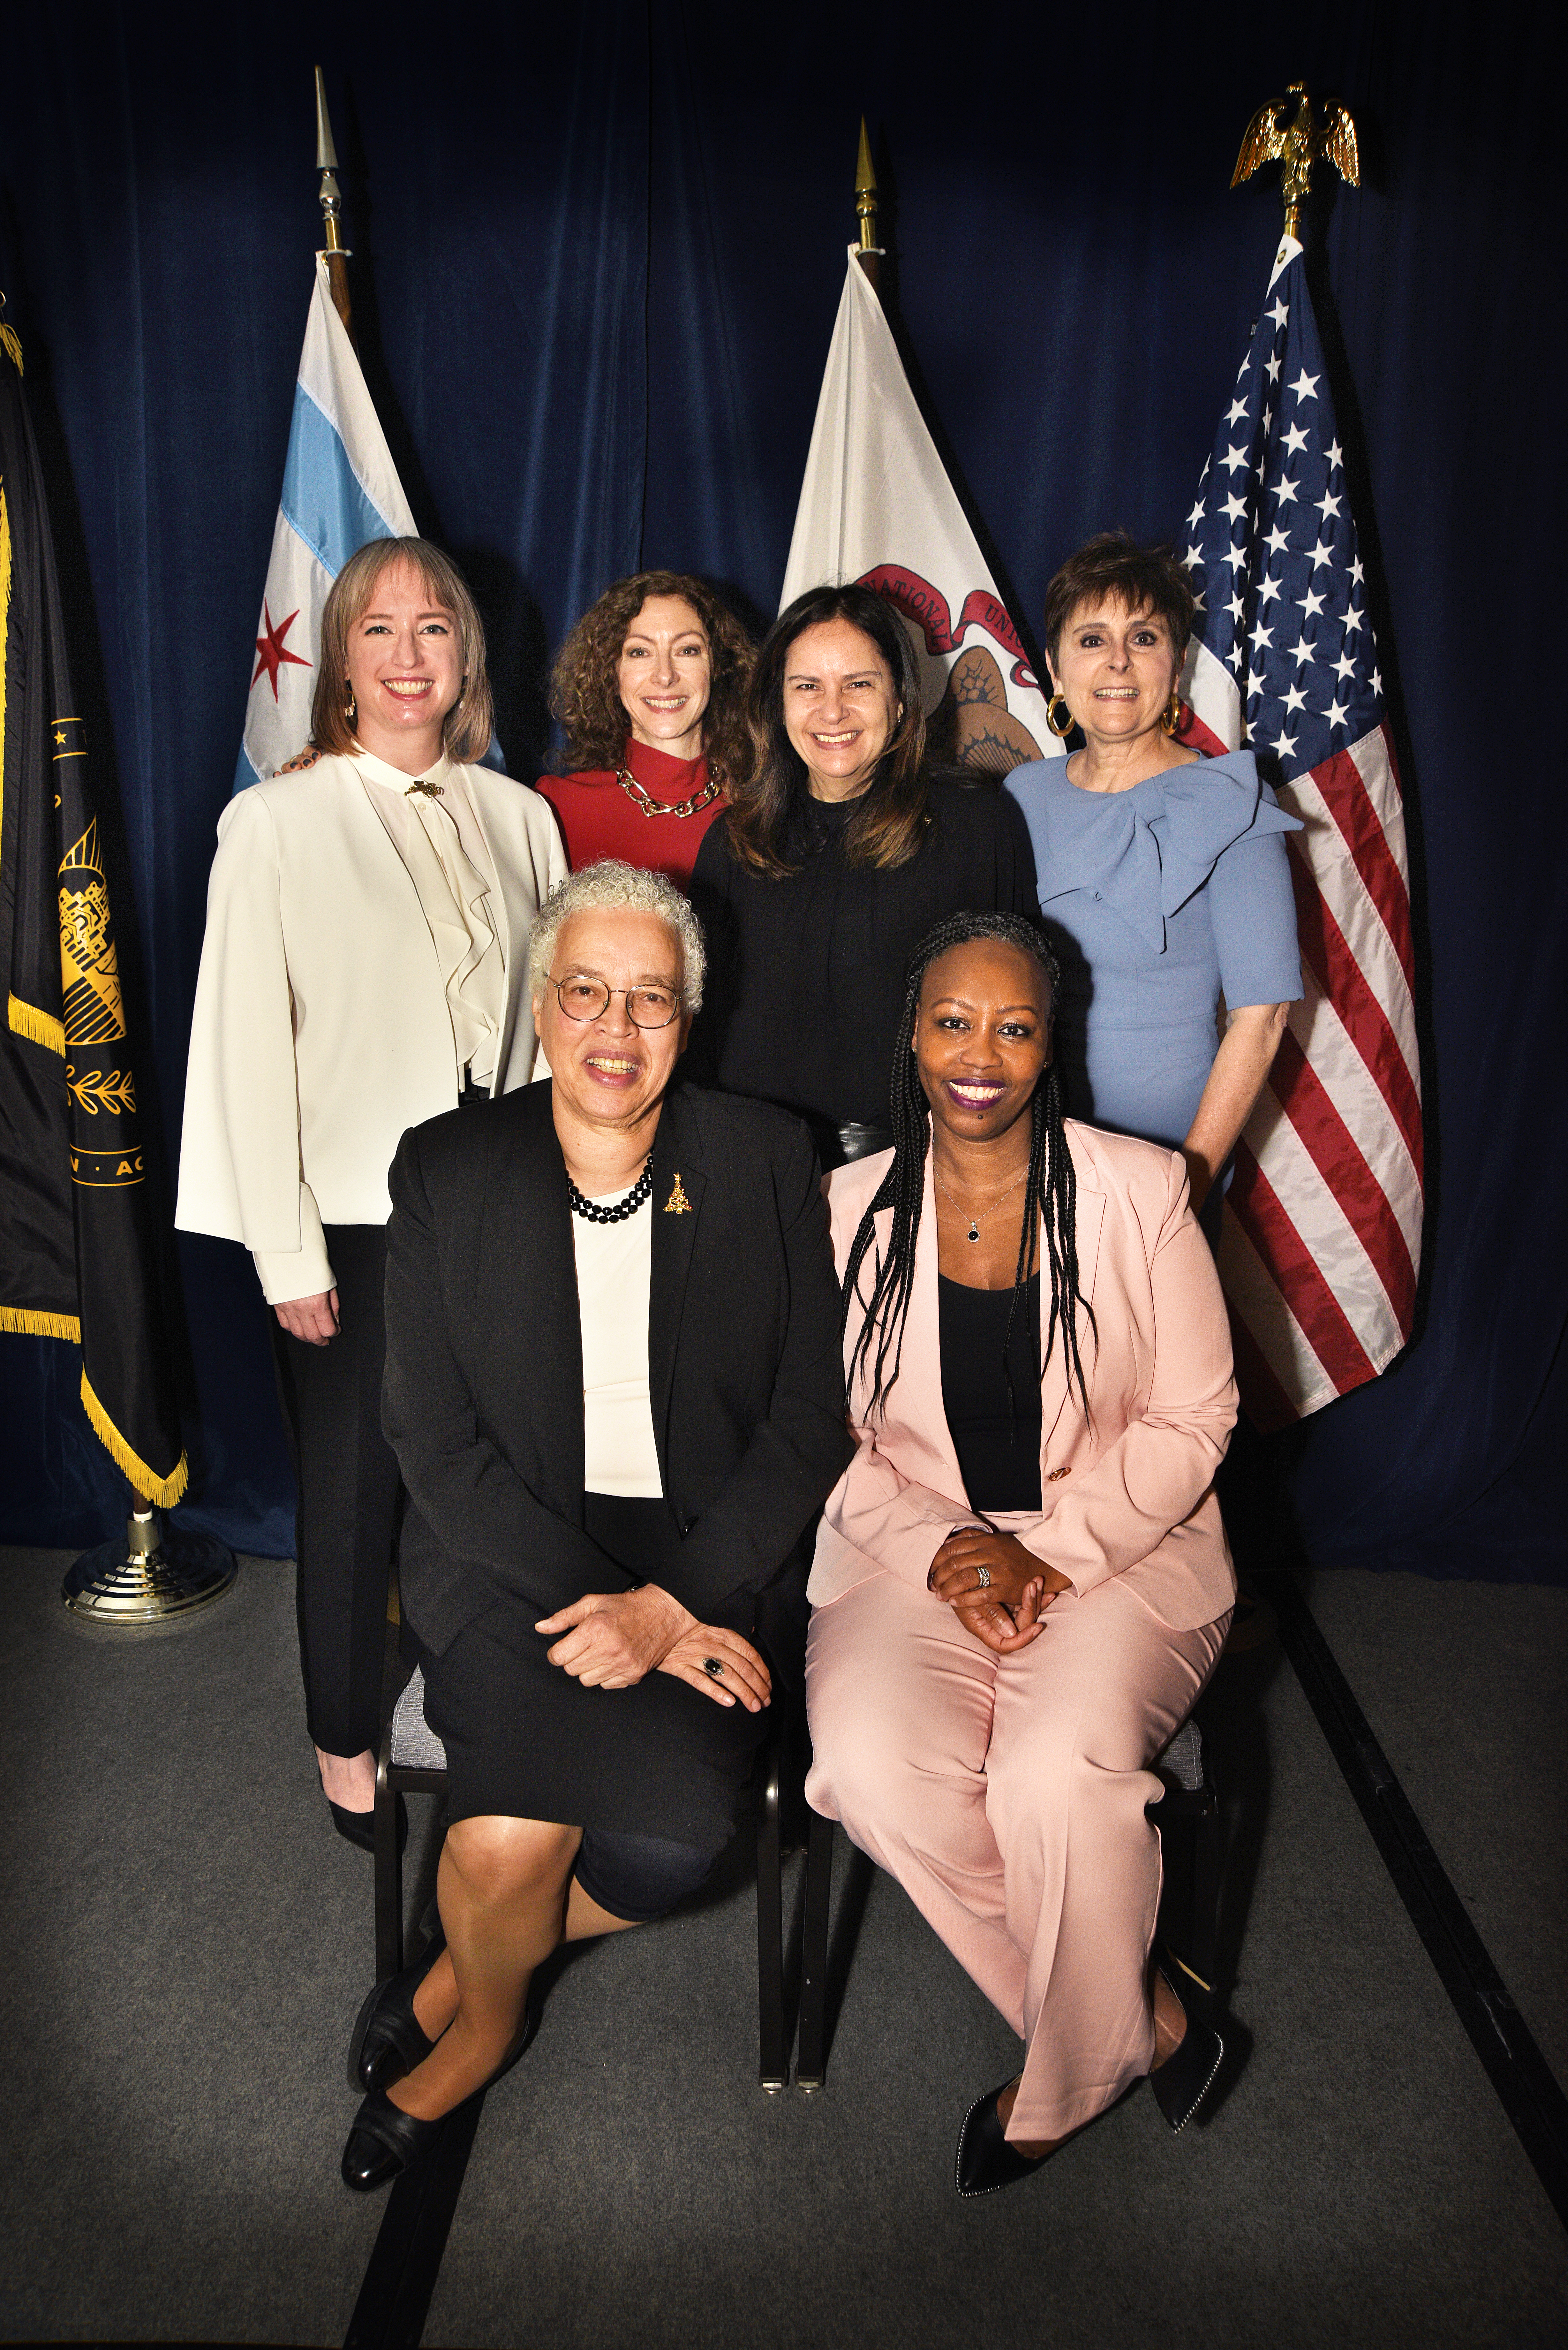 Back, left to right: Civic Federation Acting President Sarah Wetmore, Civic Federation Vice Chair Jill Wolowitz, Motorola Solutions Senior Vice President Cynthia Yazdi and Civic Federation Past Chair Monica Mueller. Front, left to right: Cook County Board President Toni Preckwinkle and Cook County Chief of Staff Lanetta Haynes Turner.